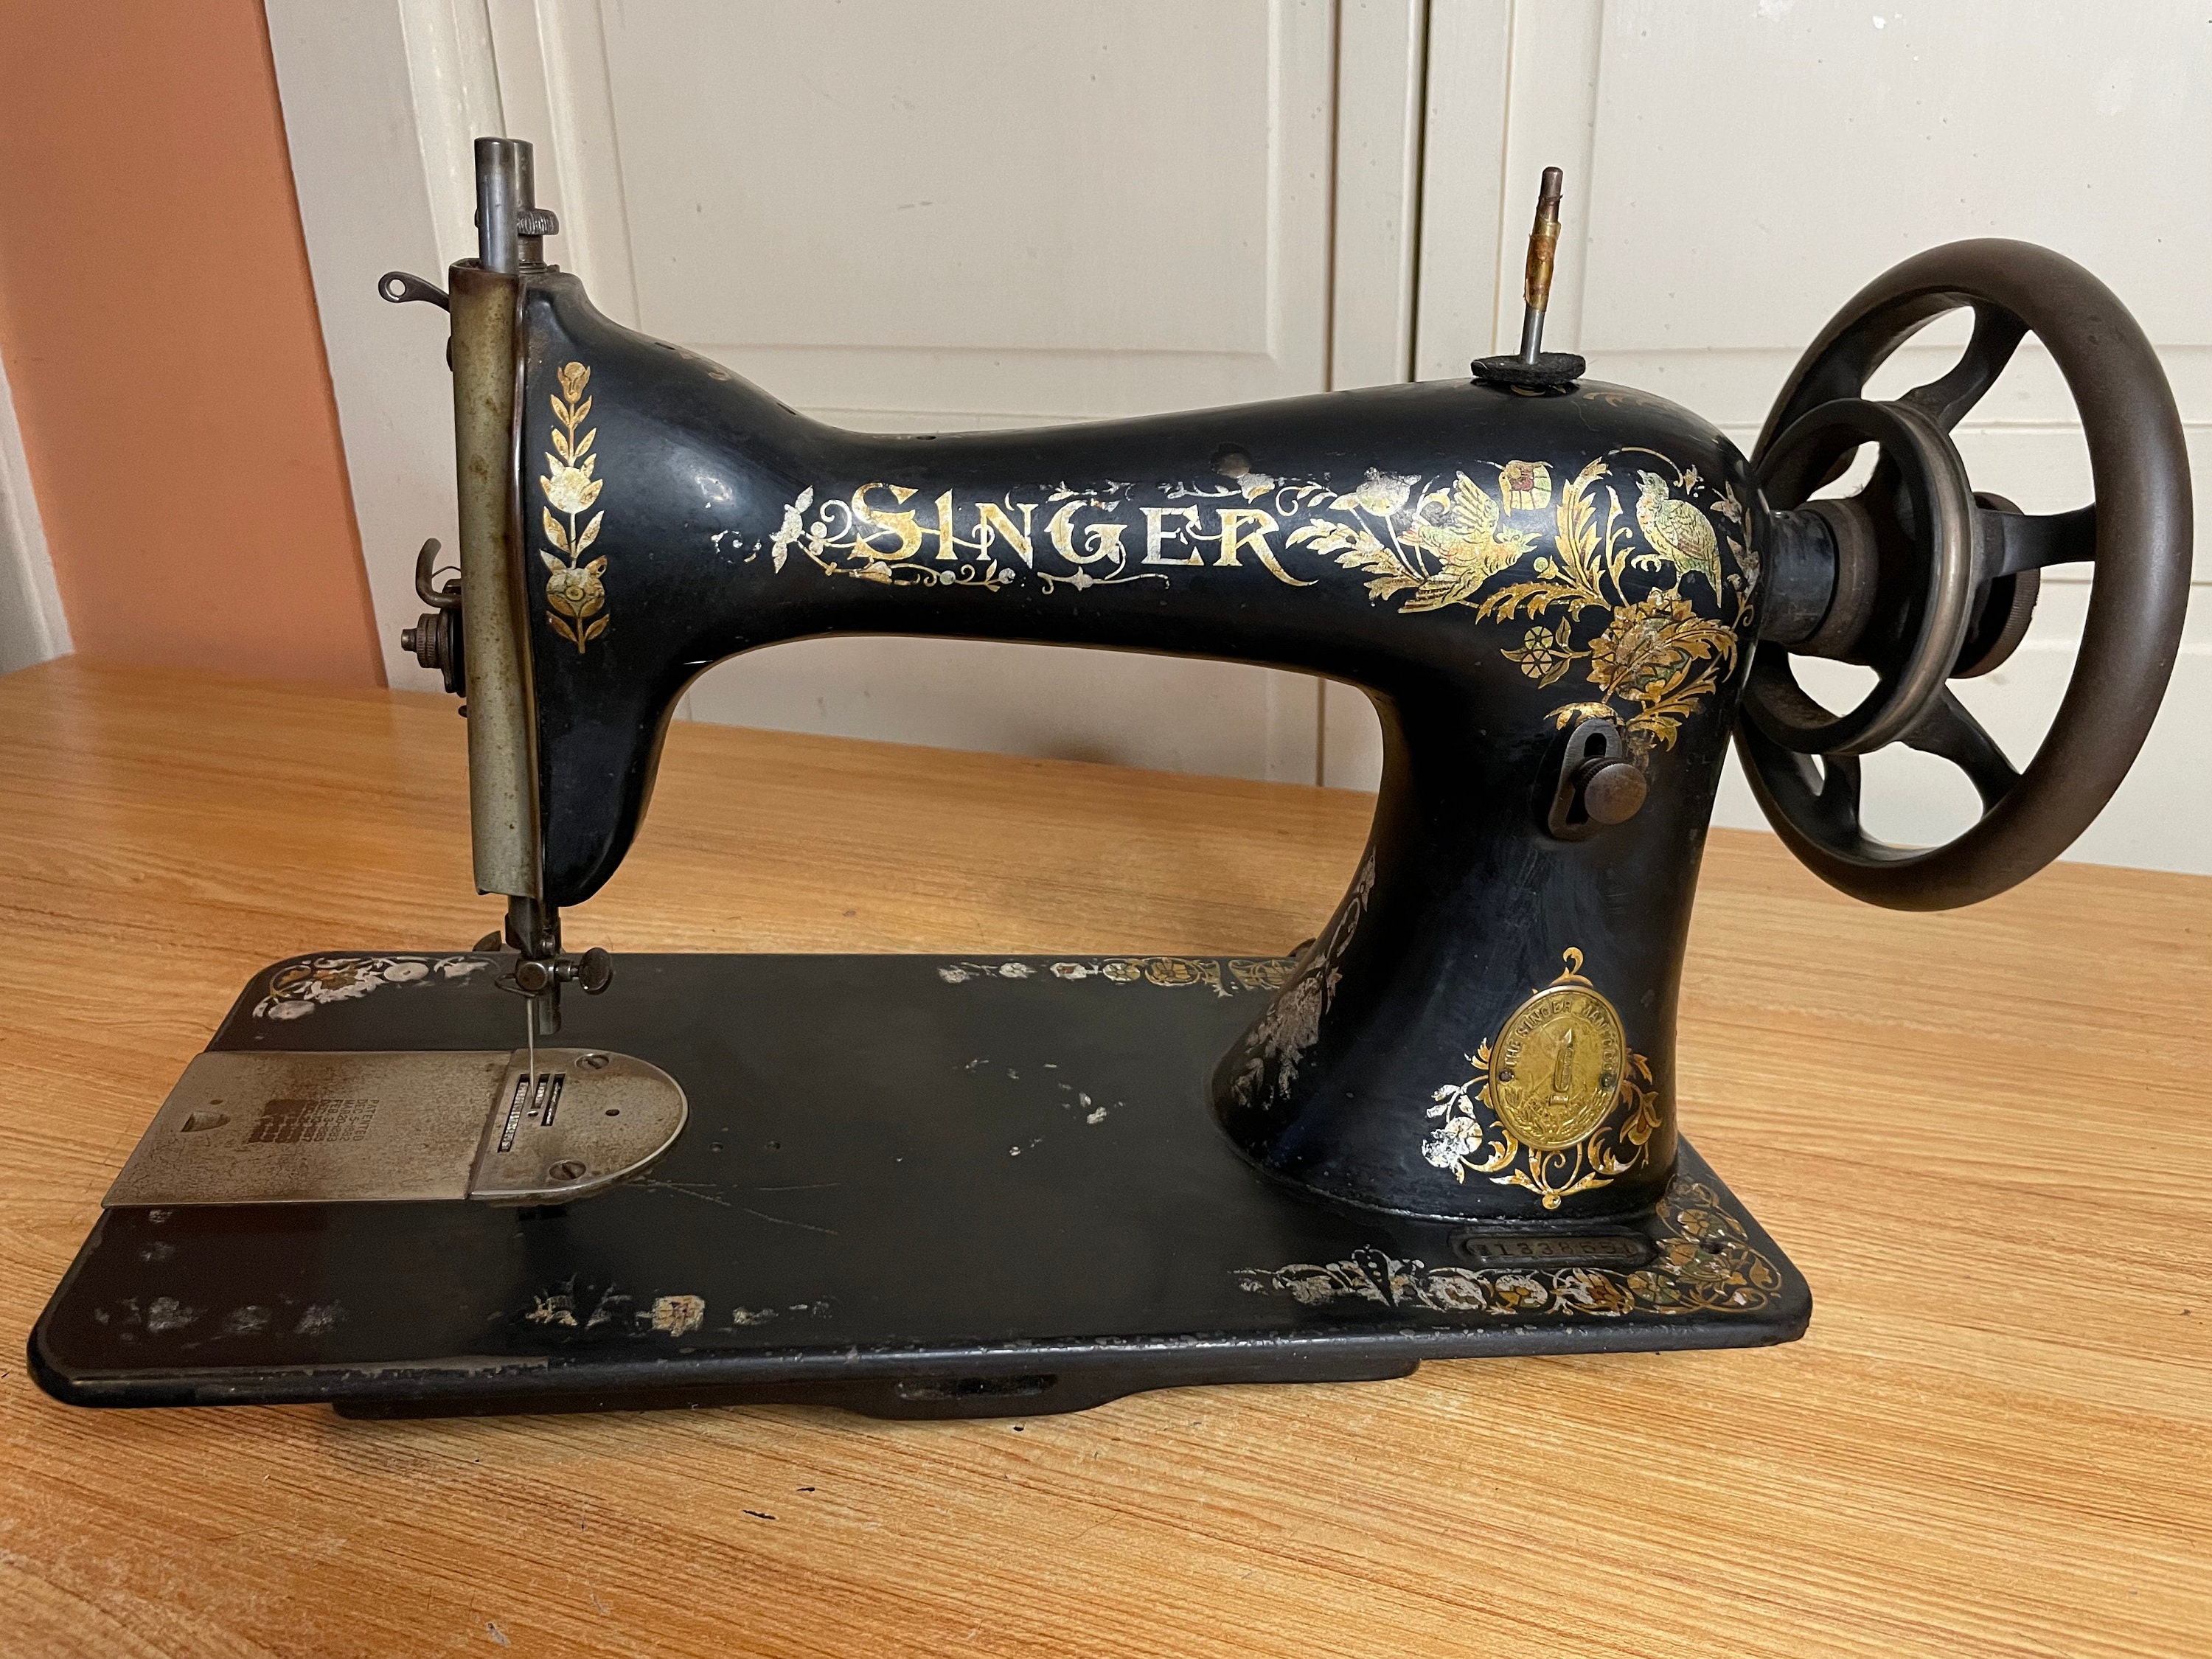 Antique Singer Sewing Machine For Sale Compared To Craigslist Only 3 Left At 60